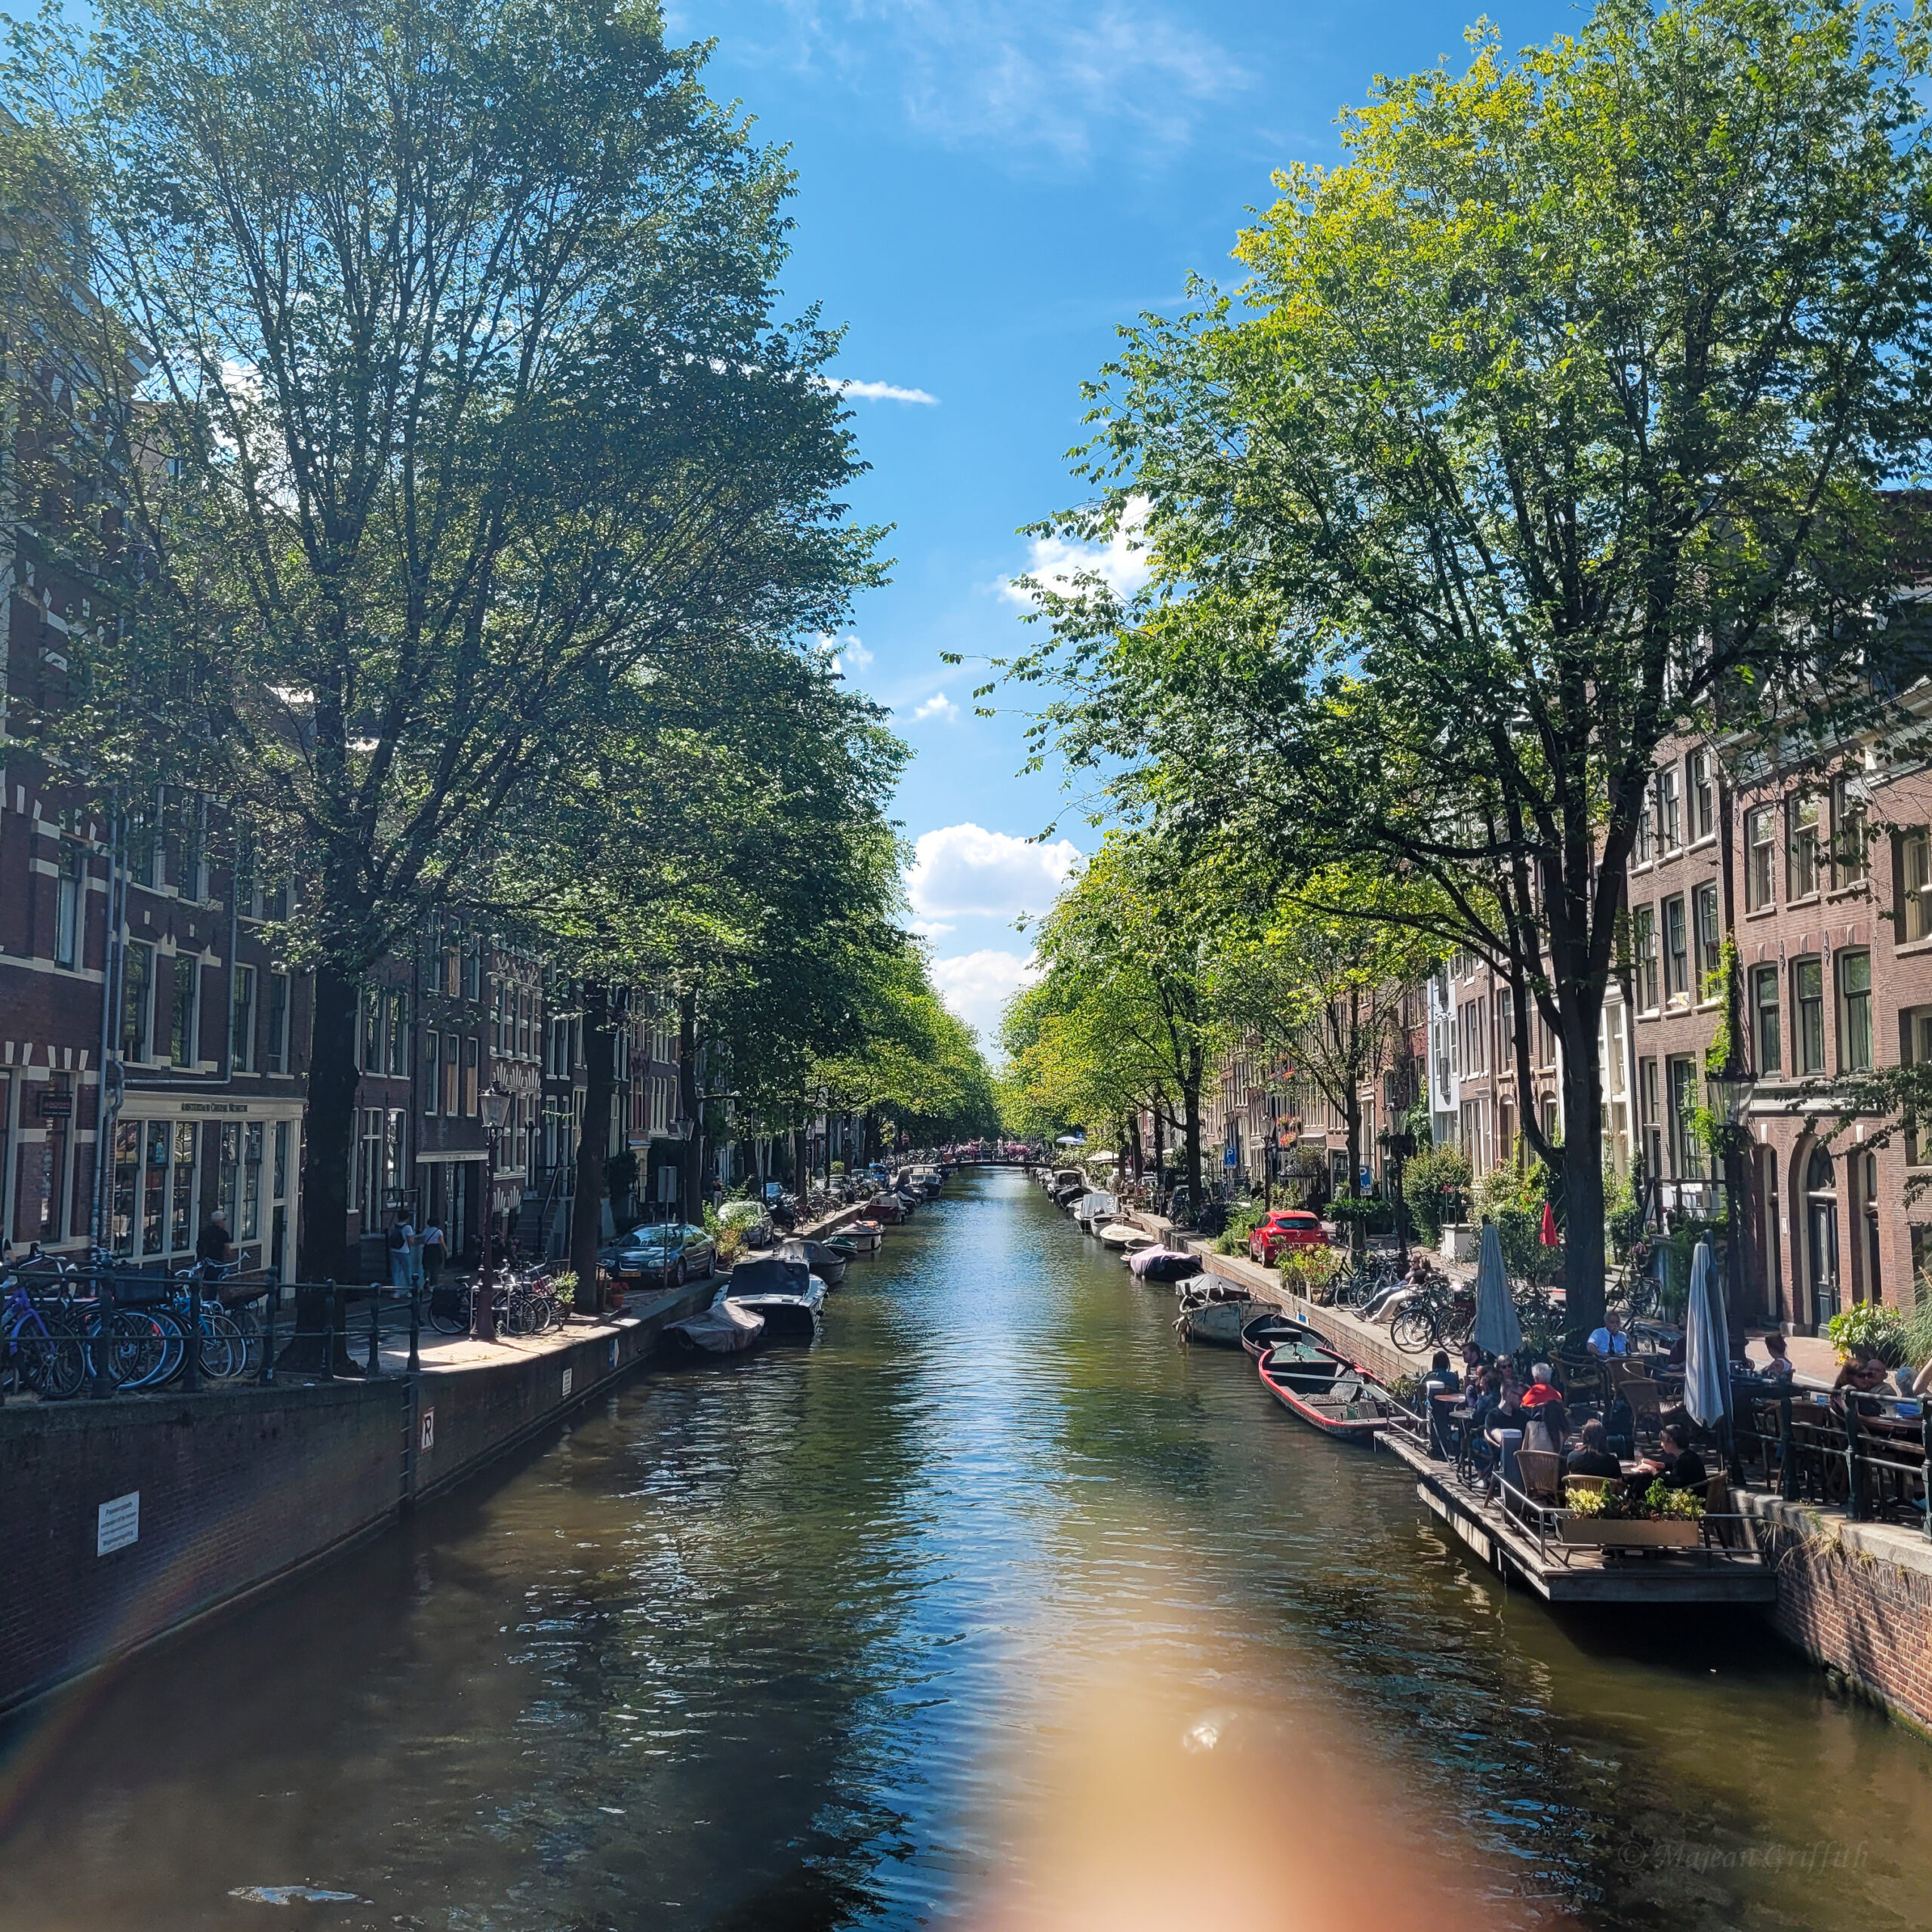 3 destinations to visit on the eurostar - Amsterdam canal